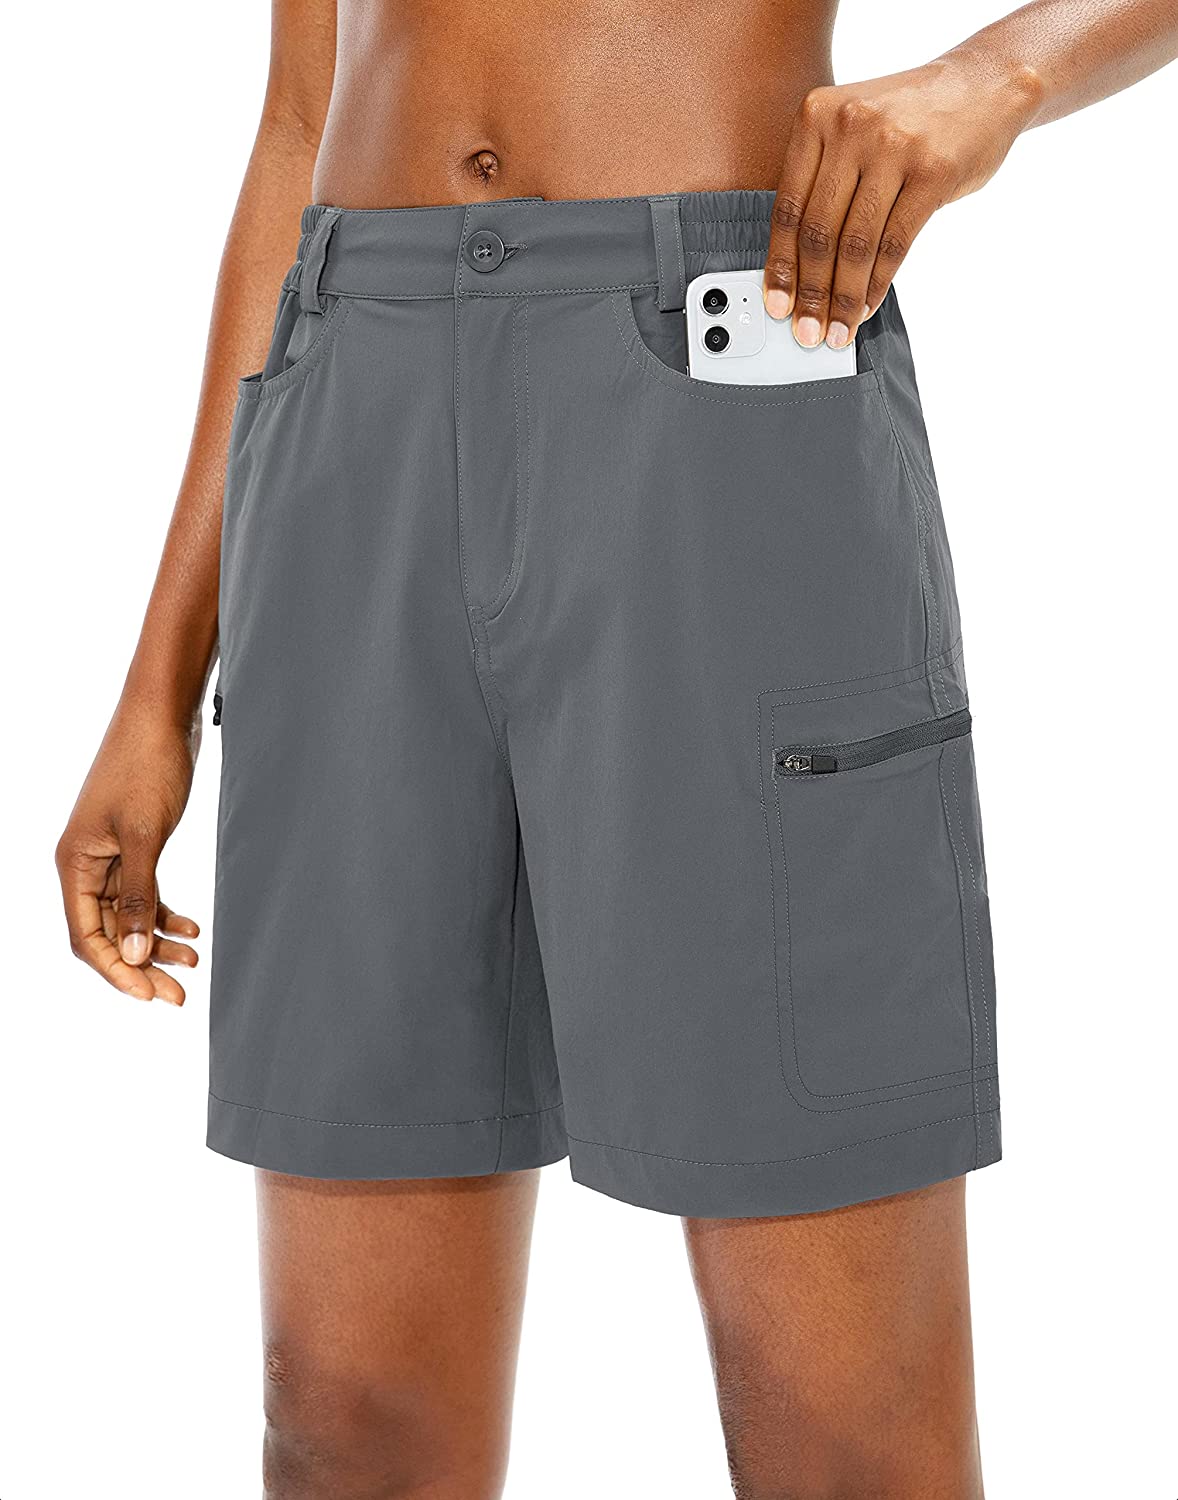 Viodia Women's Hiking Cargo Shorts Quick Dry Stretch Lightweight Camping Shorts for Women with Zipper Pockets